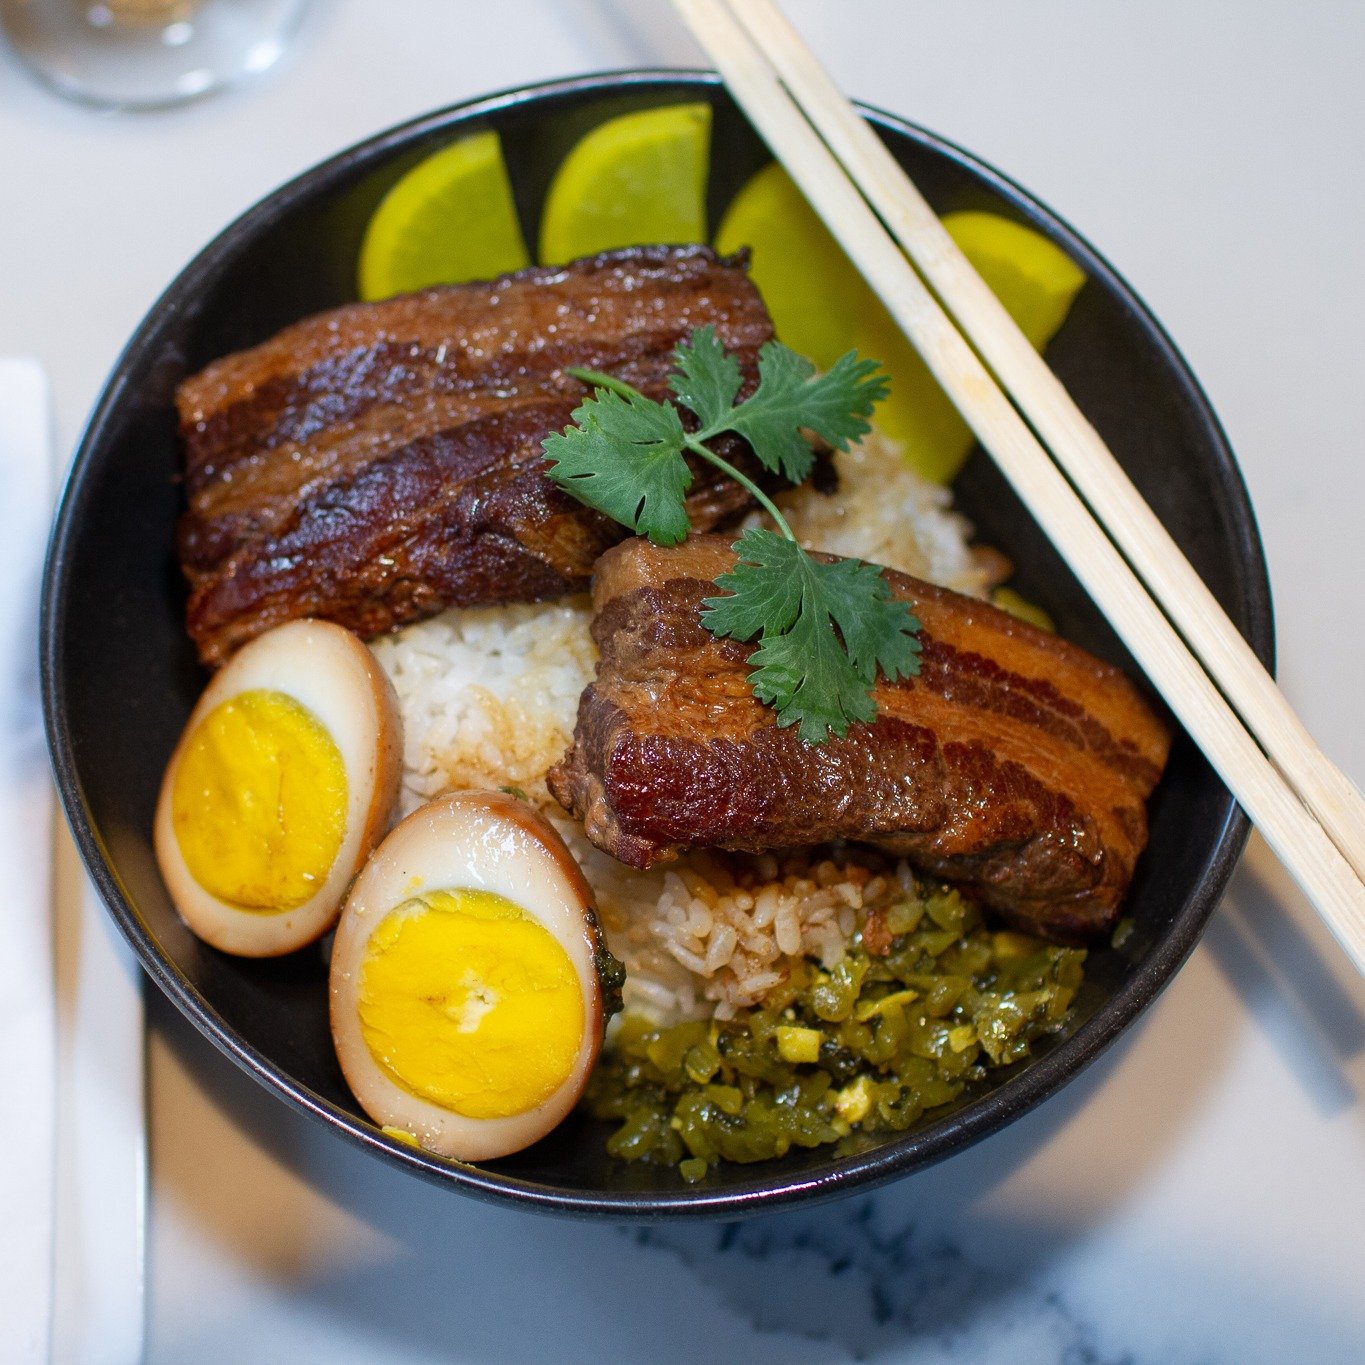 We love choices. You can change our regular braised pork belly rice bowl (滷肉飯 Lu Rou Fan) into Jumbo Pork Belly Rice Bowl (焢肉飯) with braised egg and pickled mustard green.

Both are some of the most beloved Taiwanese comfort foods. The pork belly wit